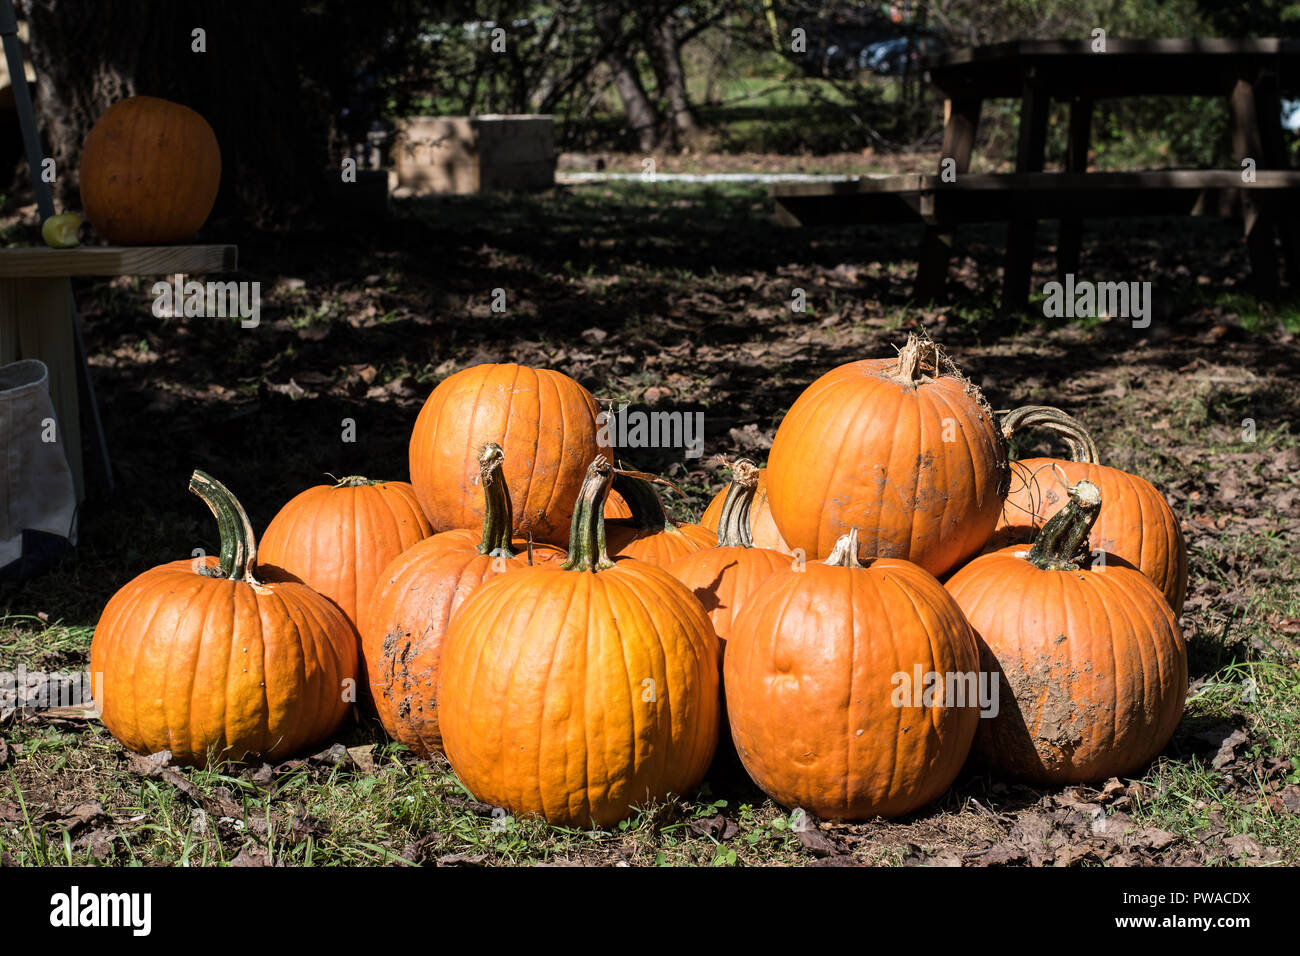 Fall festival pumpkins outside ready for family fun carving Stock Photo